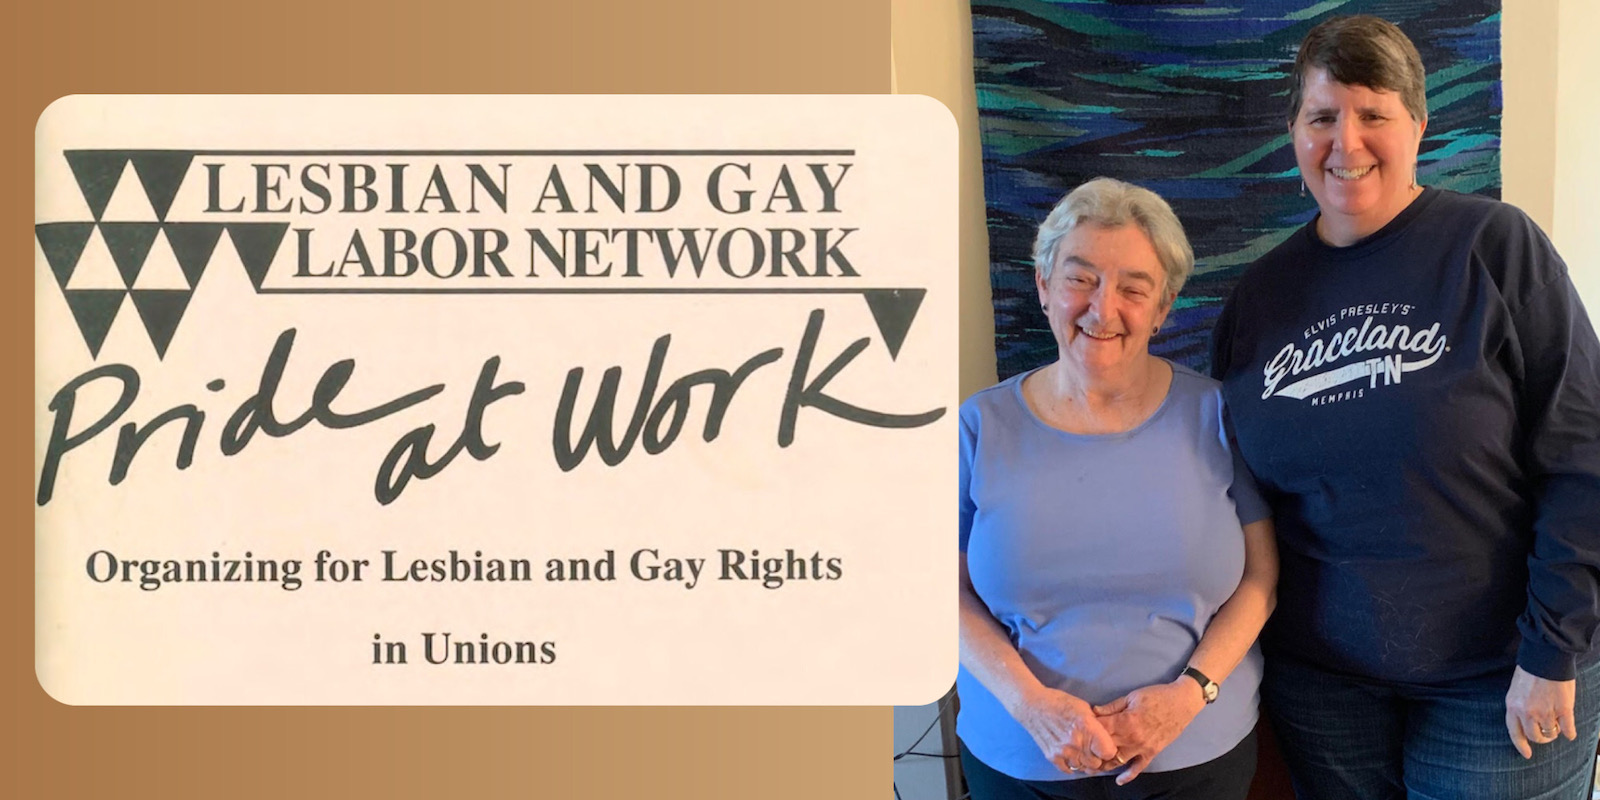 Miriam Frank and Desma Holcomb pose together in their NYC apartment, and the cover of Pride At Work, the 100 page union organizing pamphlet they wrote together, is featured next to them